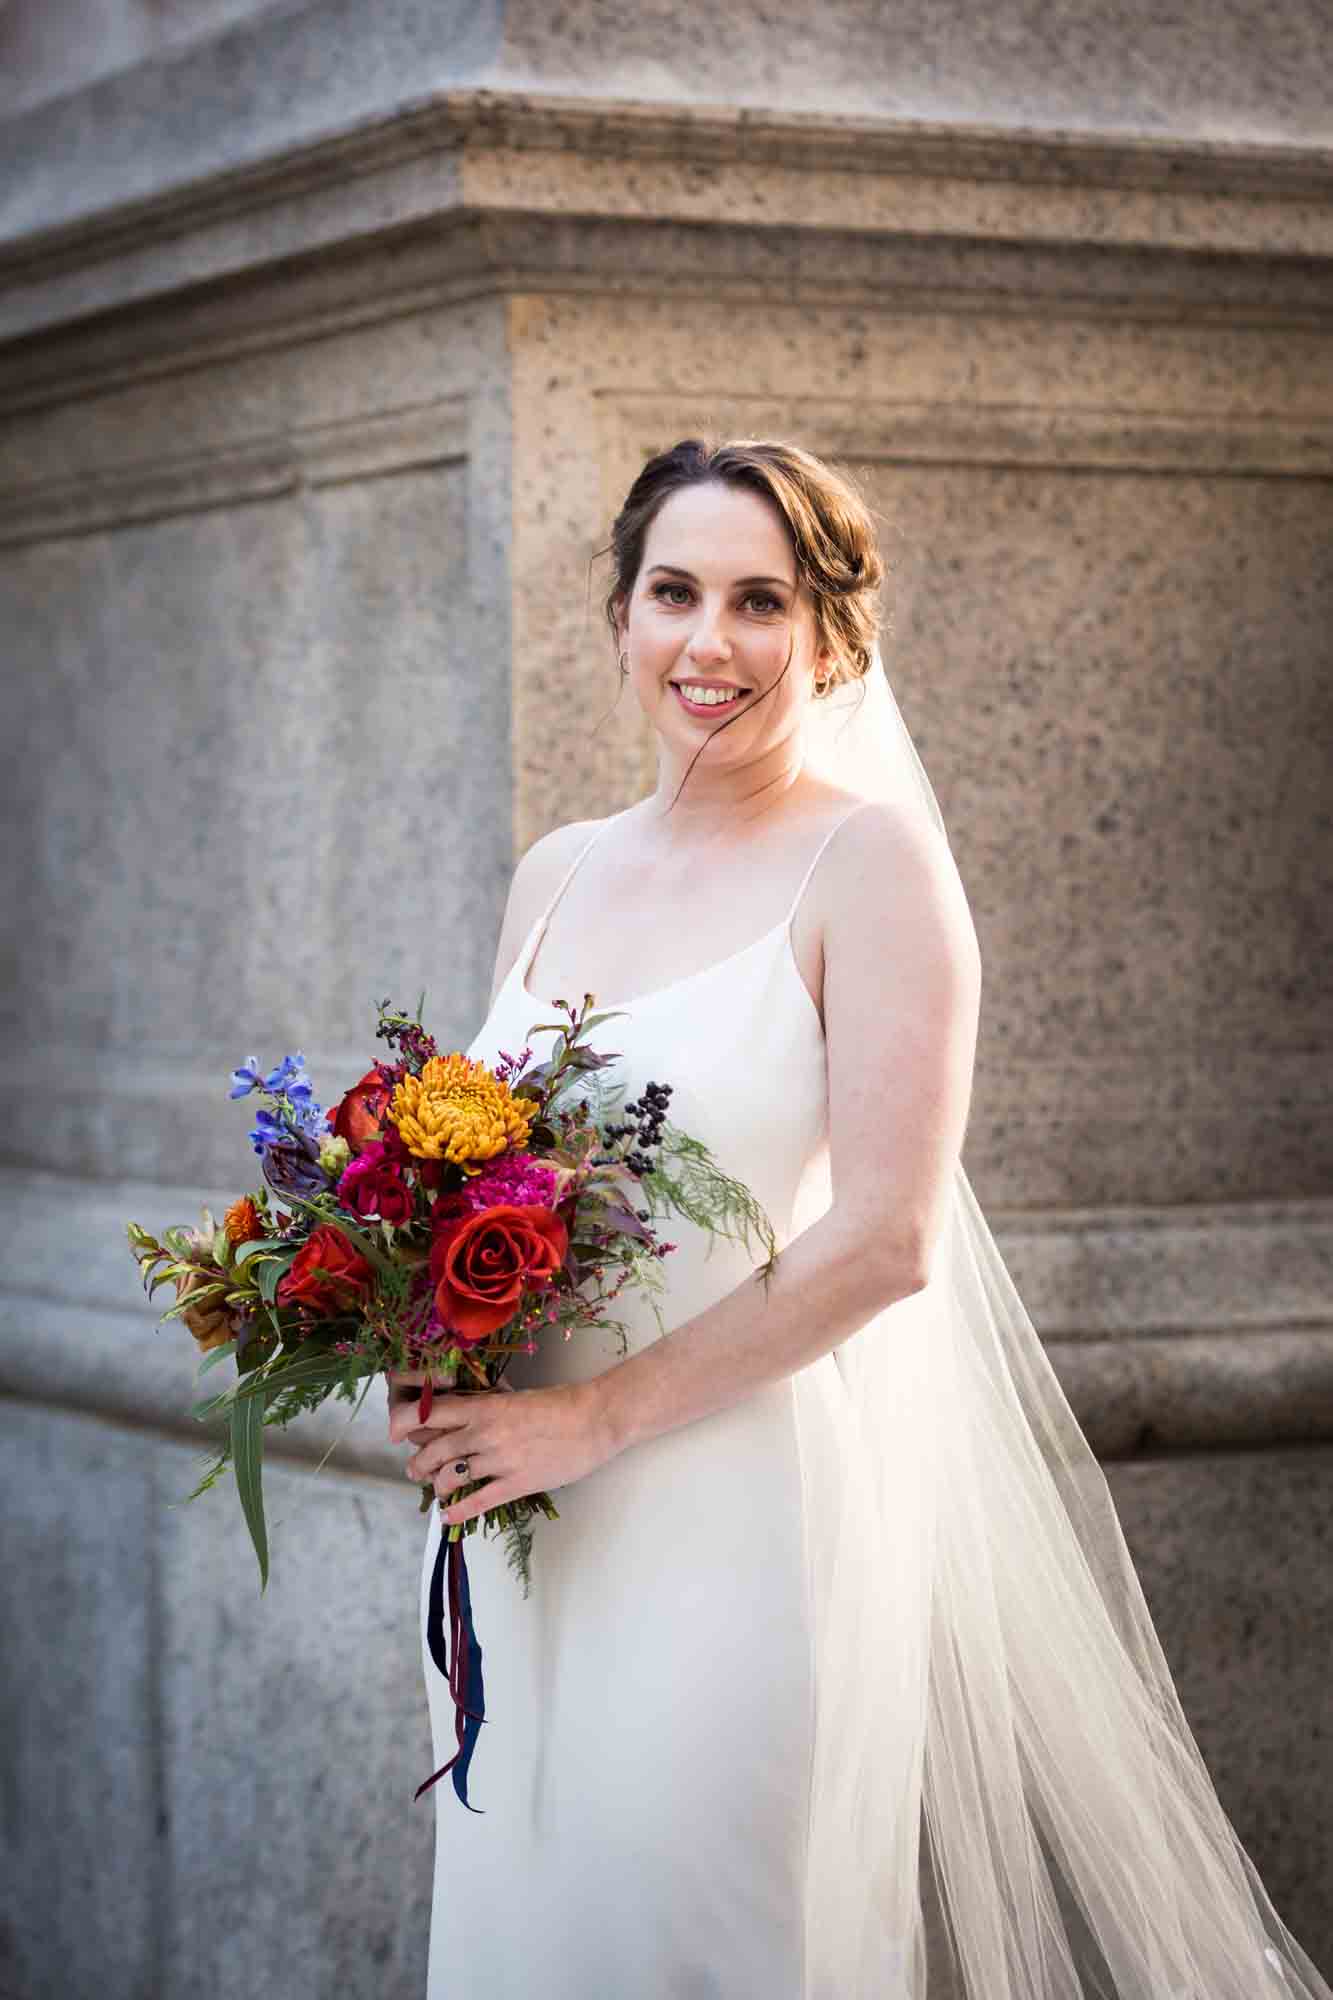 Bride holding colorful flower bouquet in front of stone building